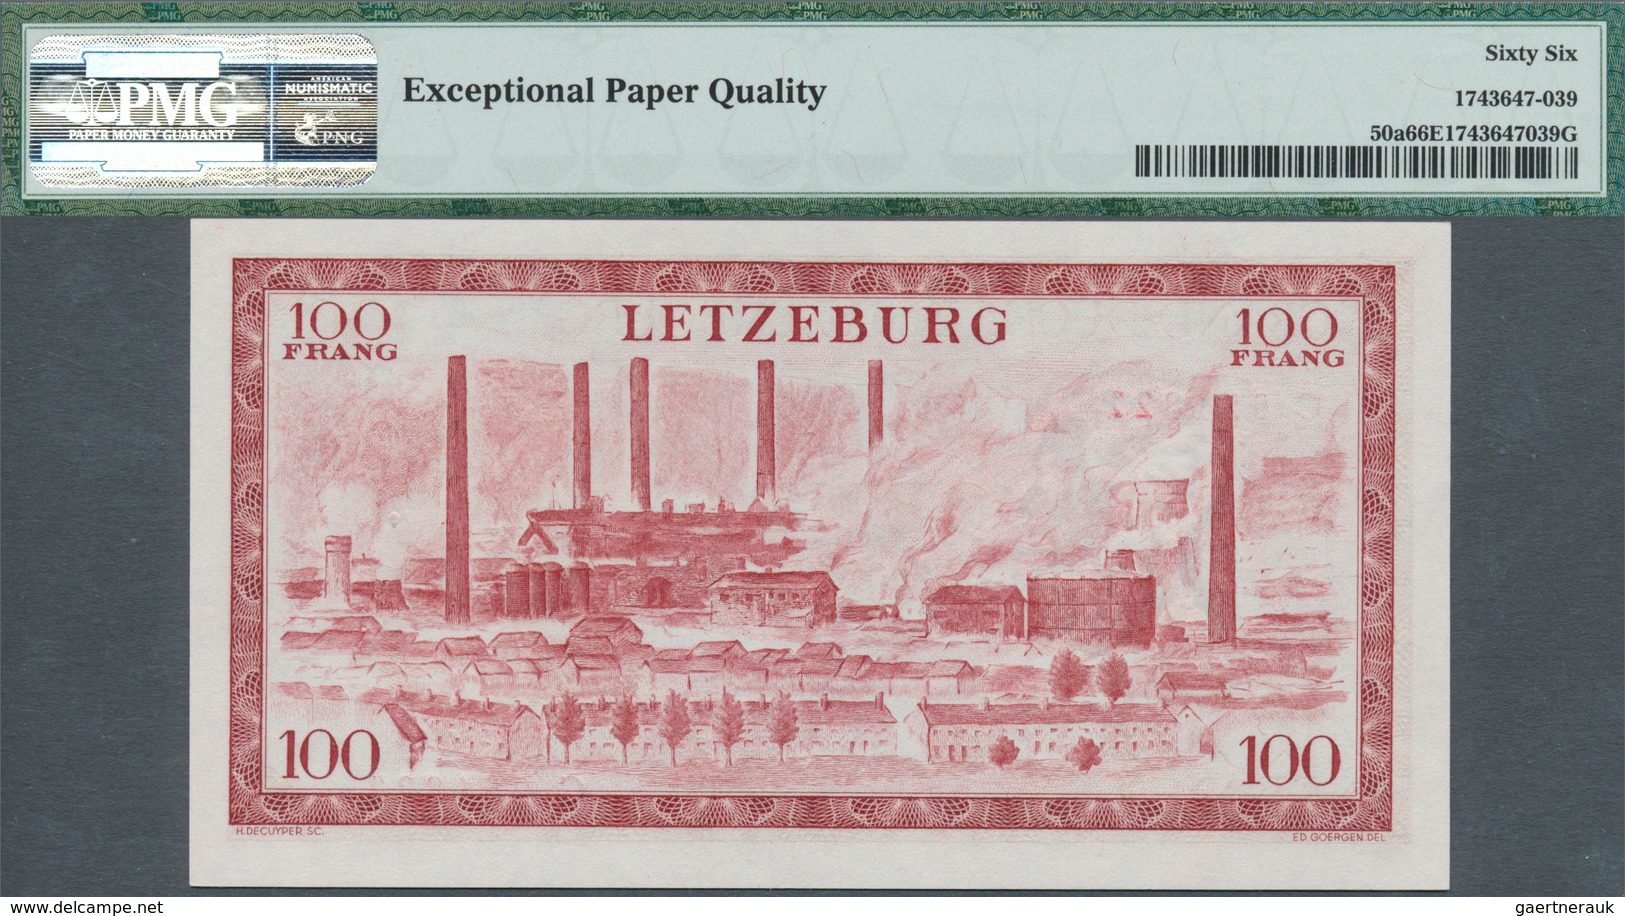 01940 Luxembourg: 100 Francs 1956 P. 50a, Condition: PMG Graded 66 Gem UNC EPQ. - Luxemburgo